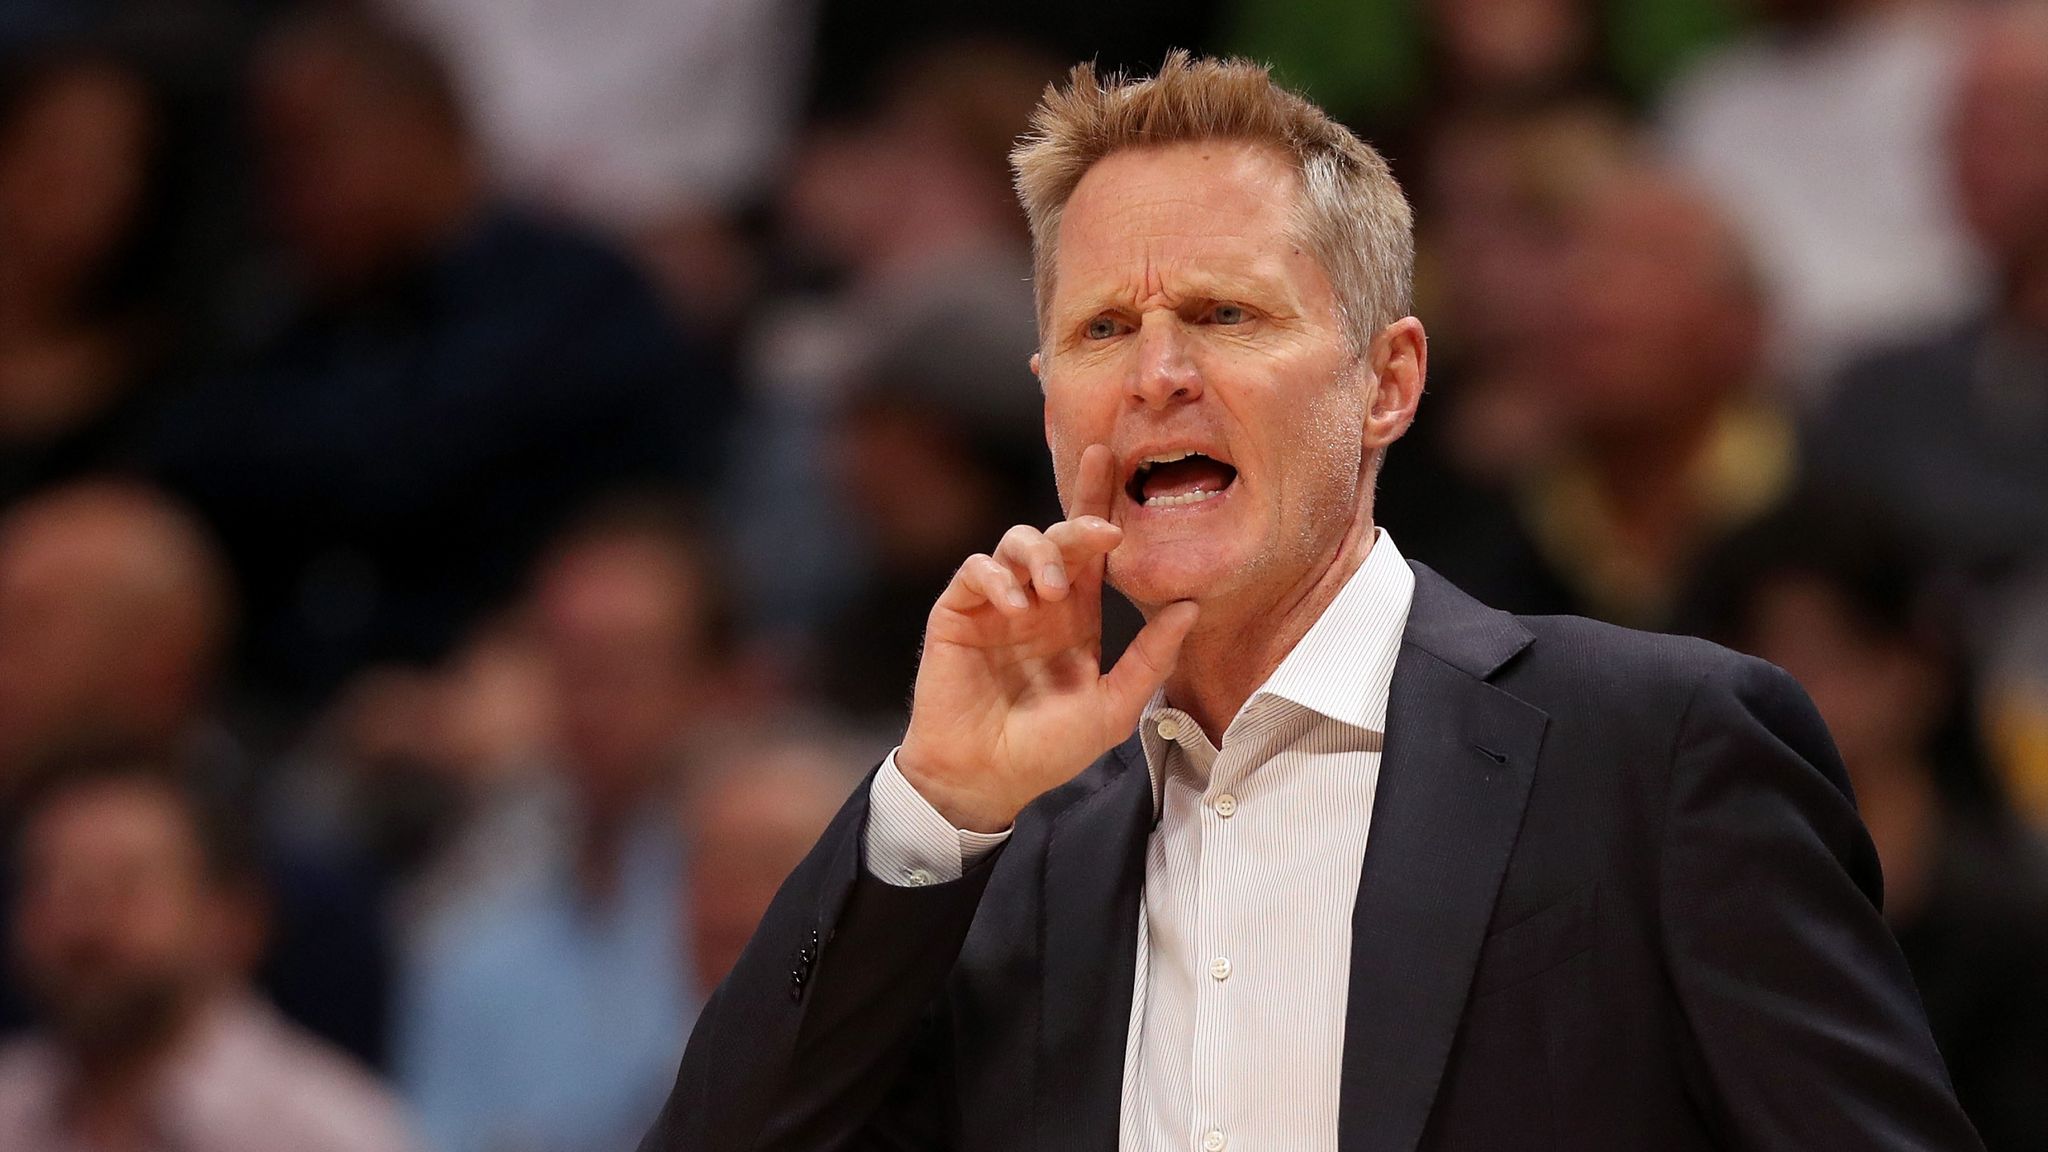 Warriors' Steve Kerr 'open minded' about NBA's proposed in-season tournament